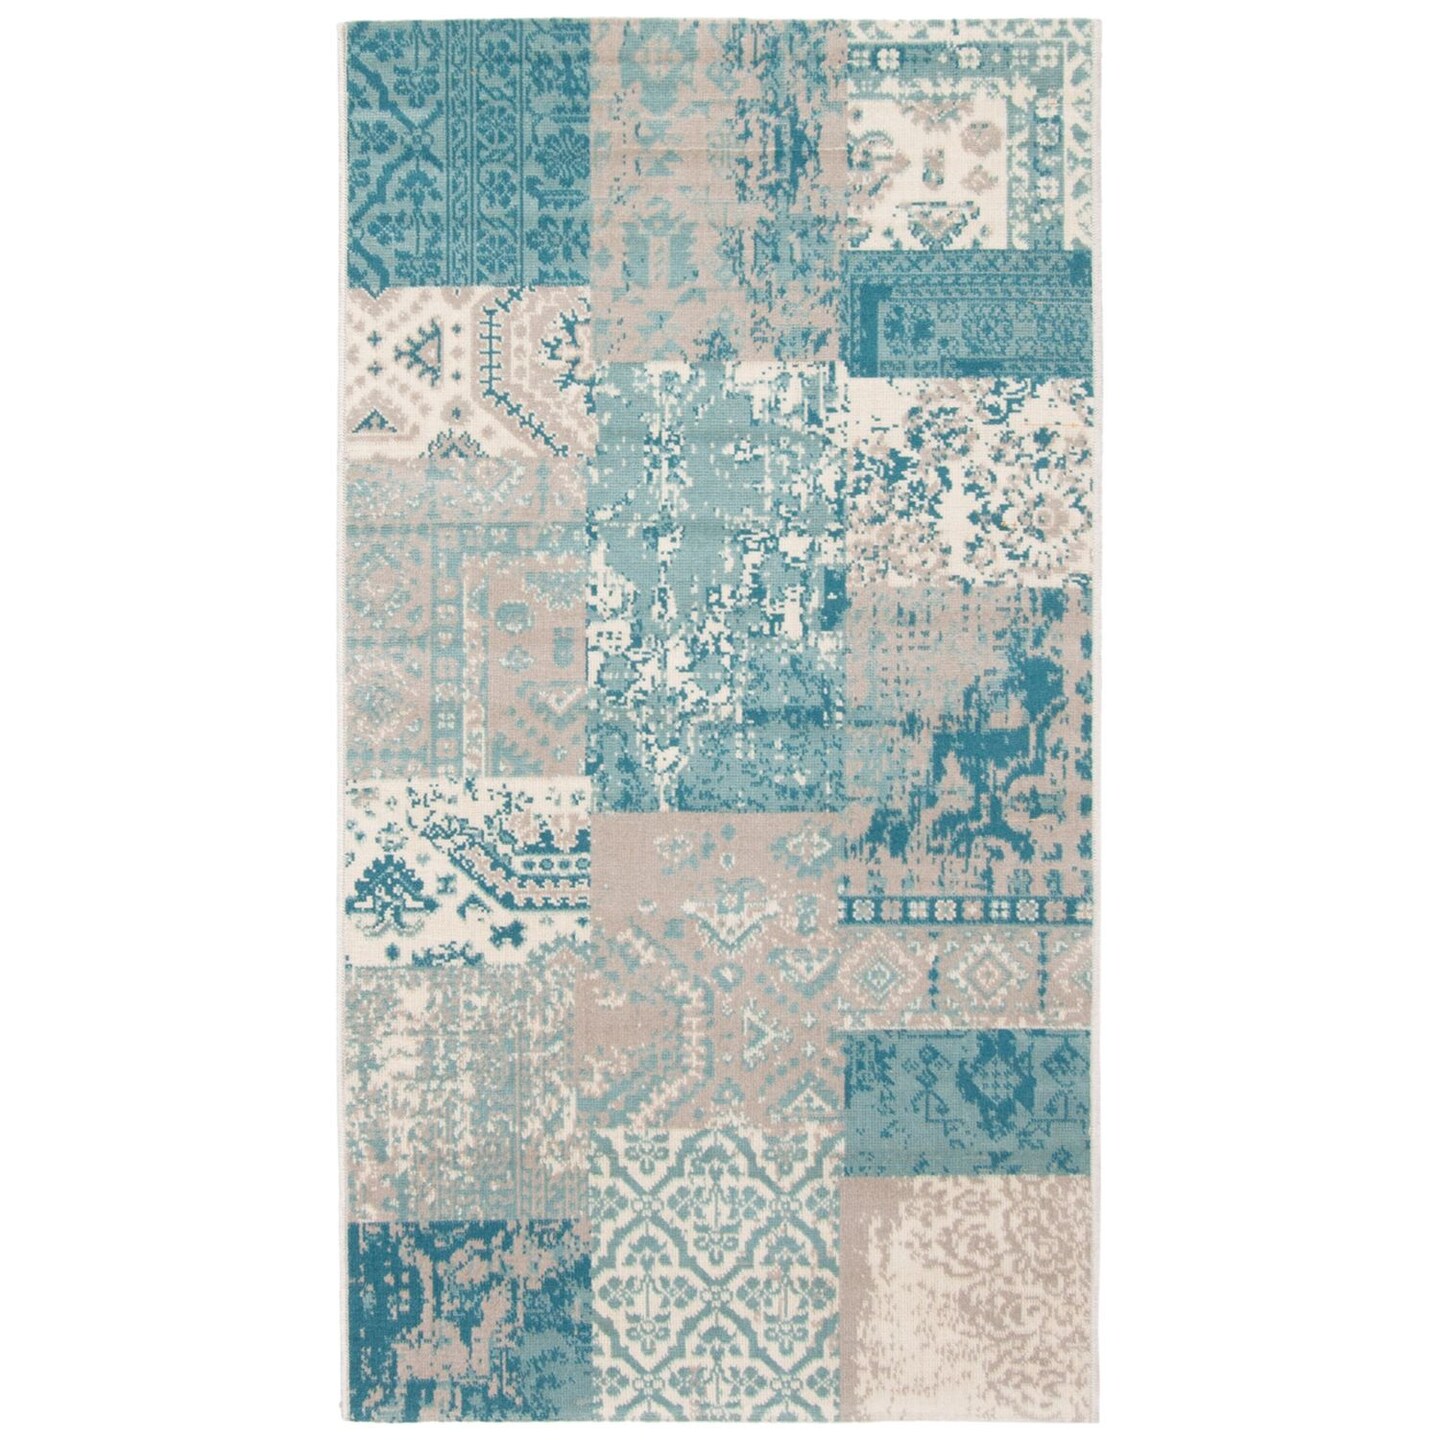 Chaudhary Living 2.5&#x27; x 5&#x27; Distressed Patchwork Rectangular Area Throw Rug - Green and Cream